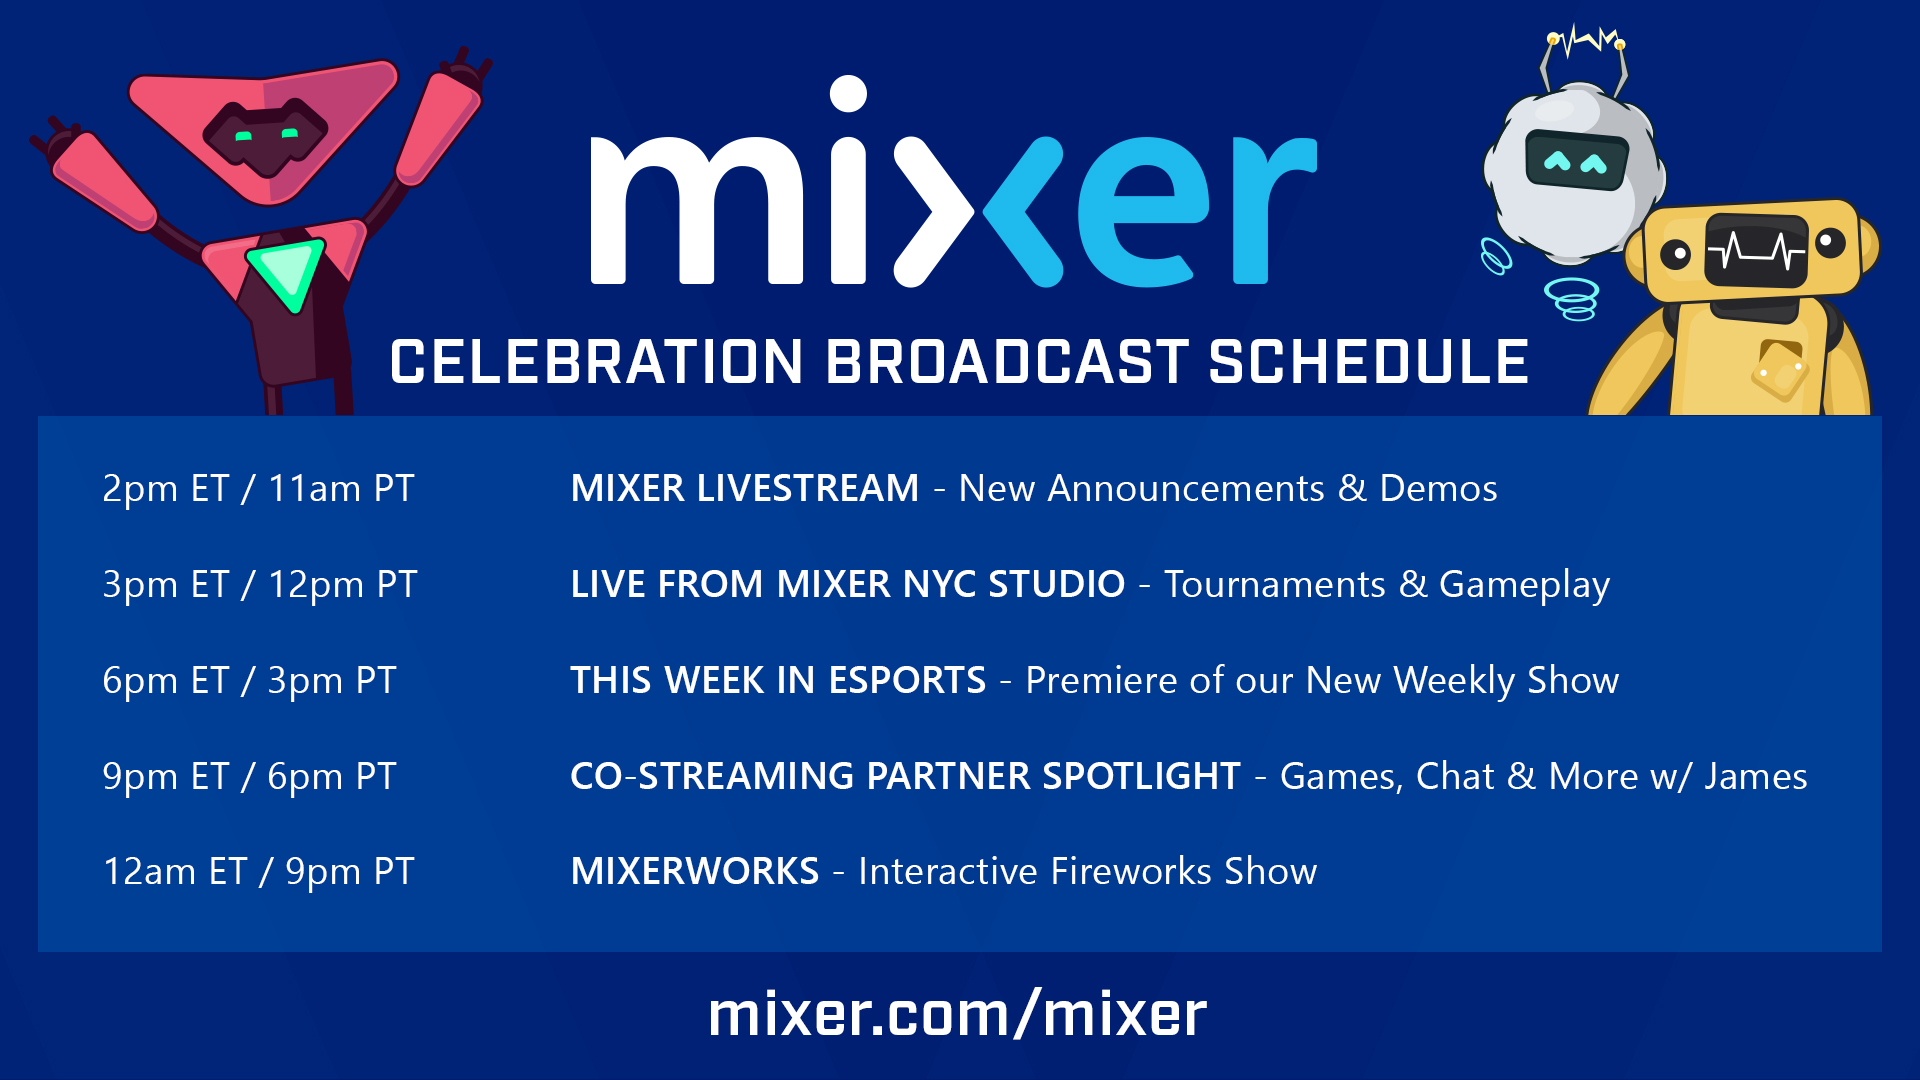 Mixer, the Microsoft app for broadcasting gameplays online, is now out